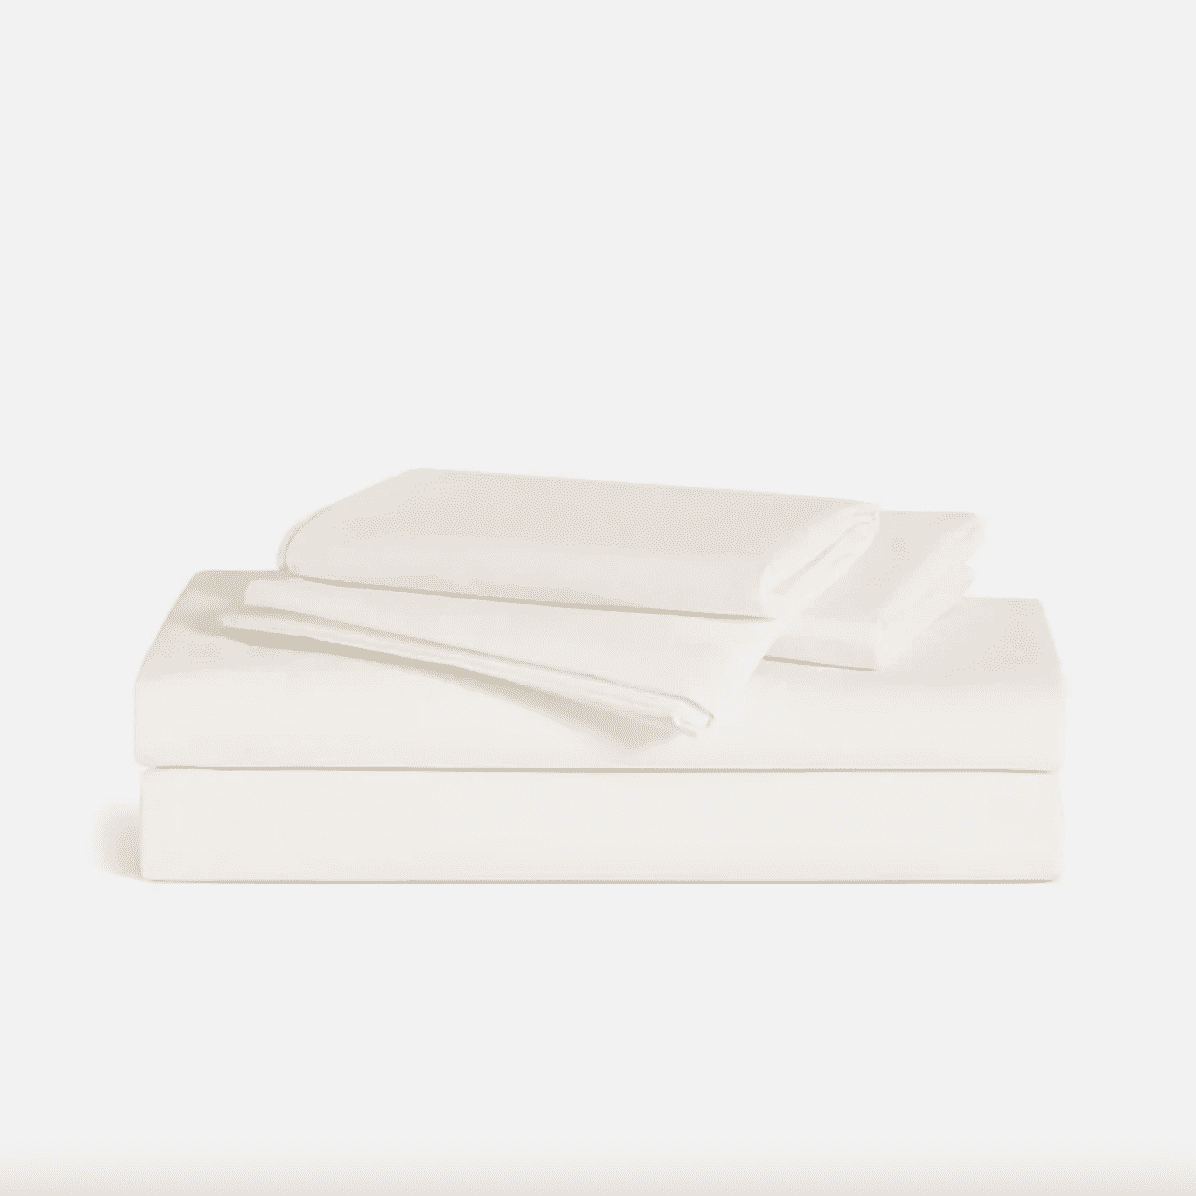 Brooklinen Towel Review + Referral Code for $25 off